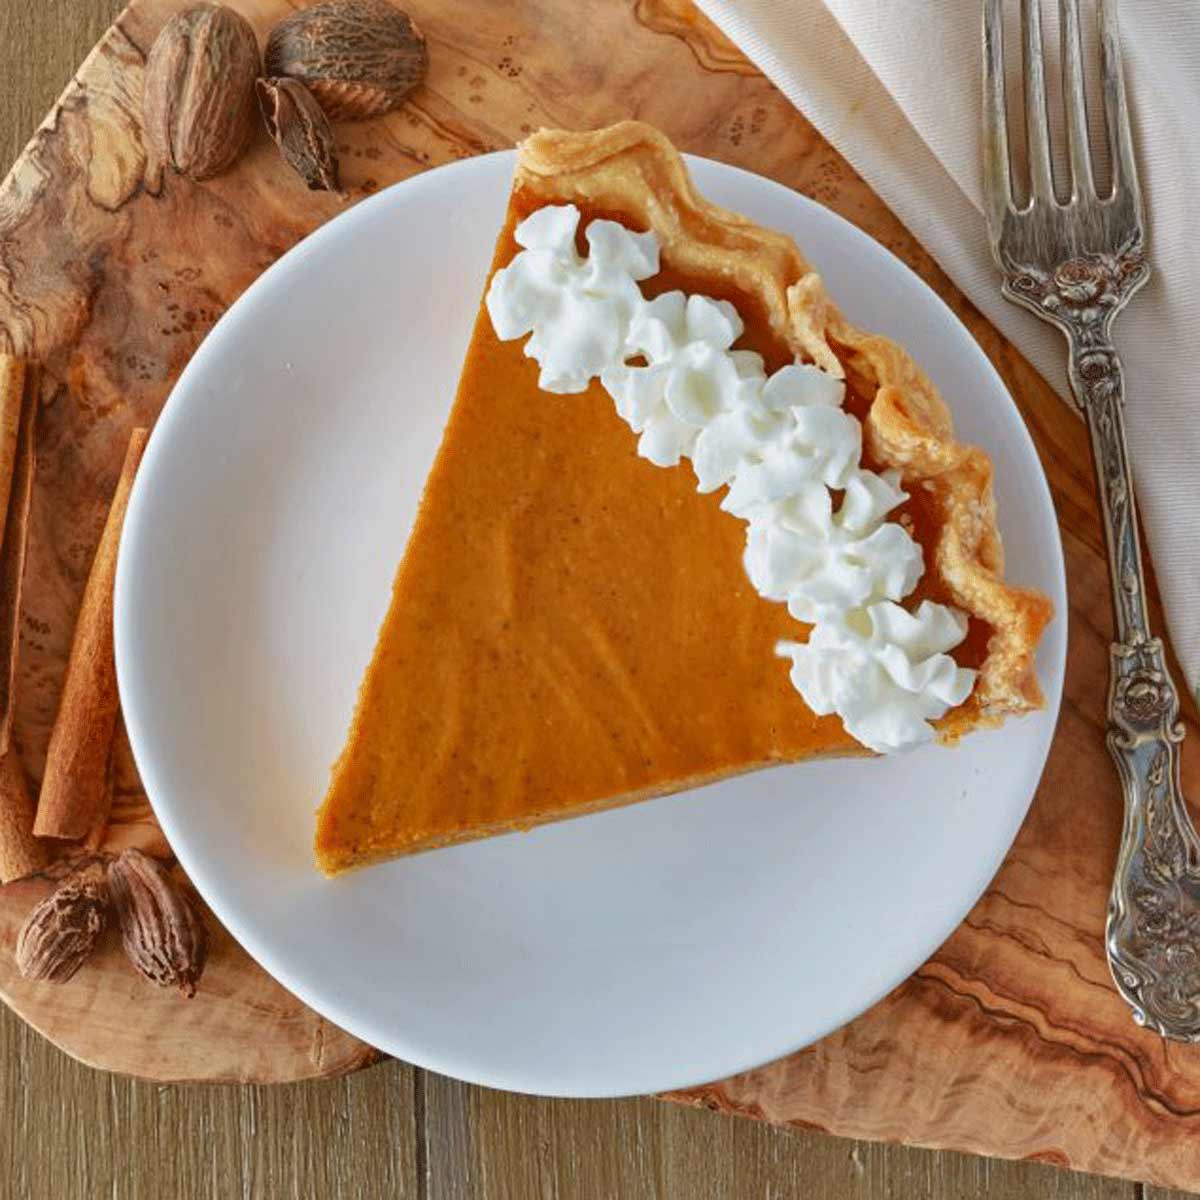 Plate with pumpkin pie with whipped cream.